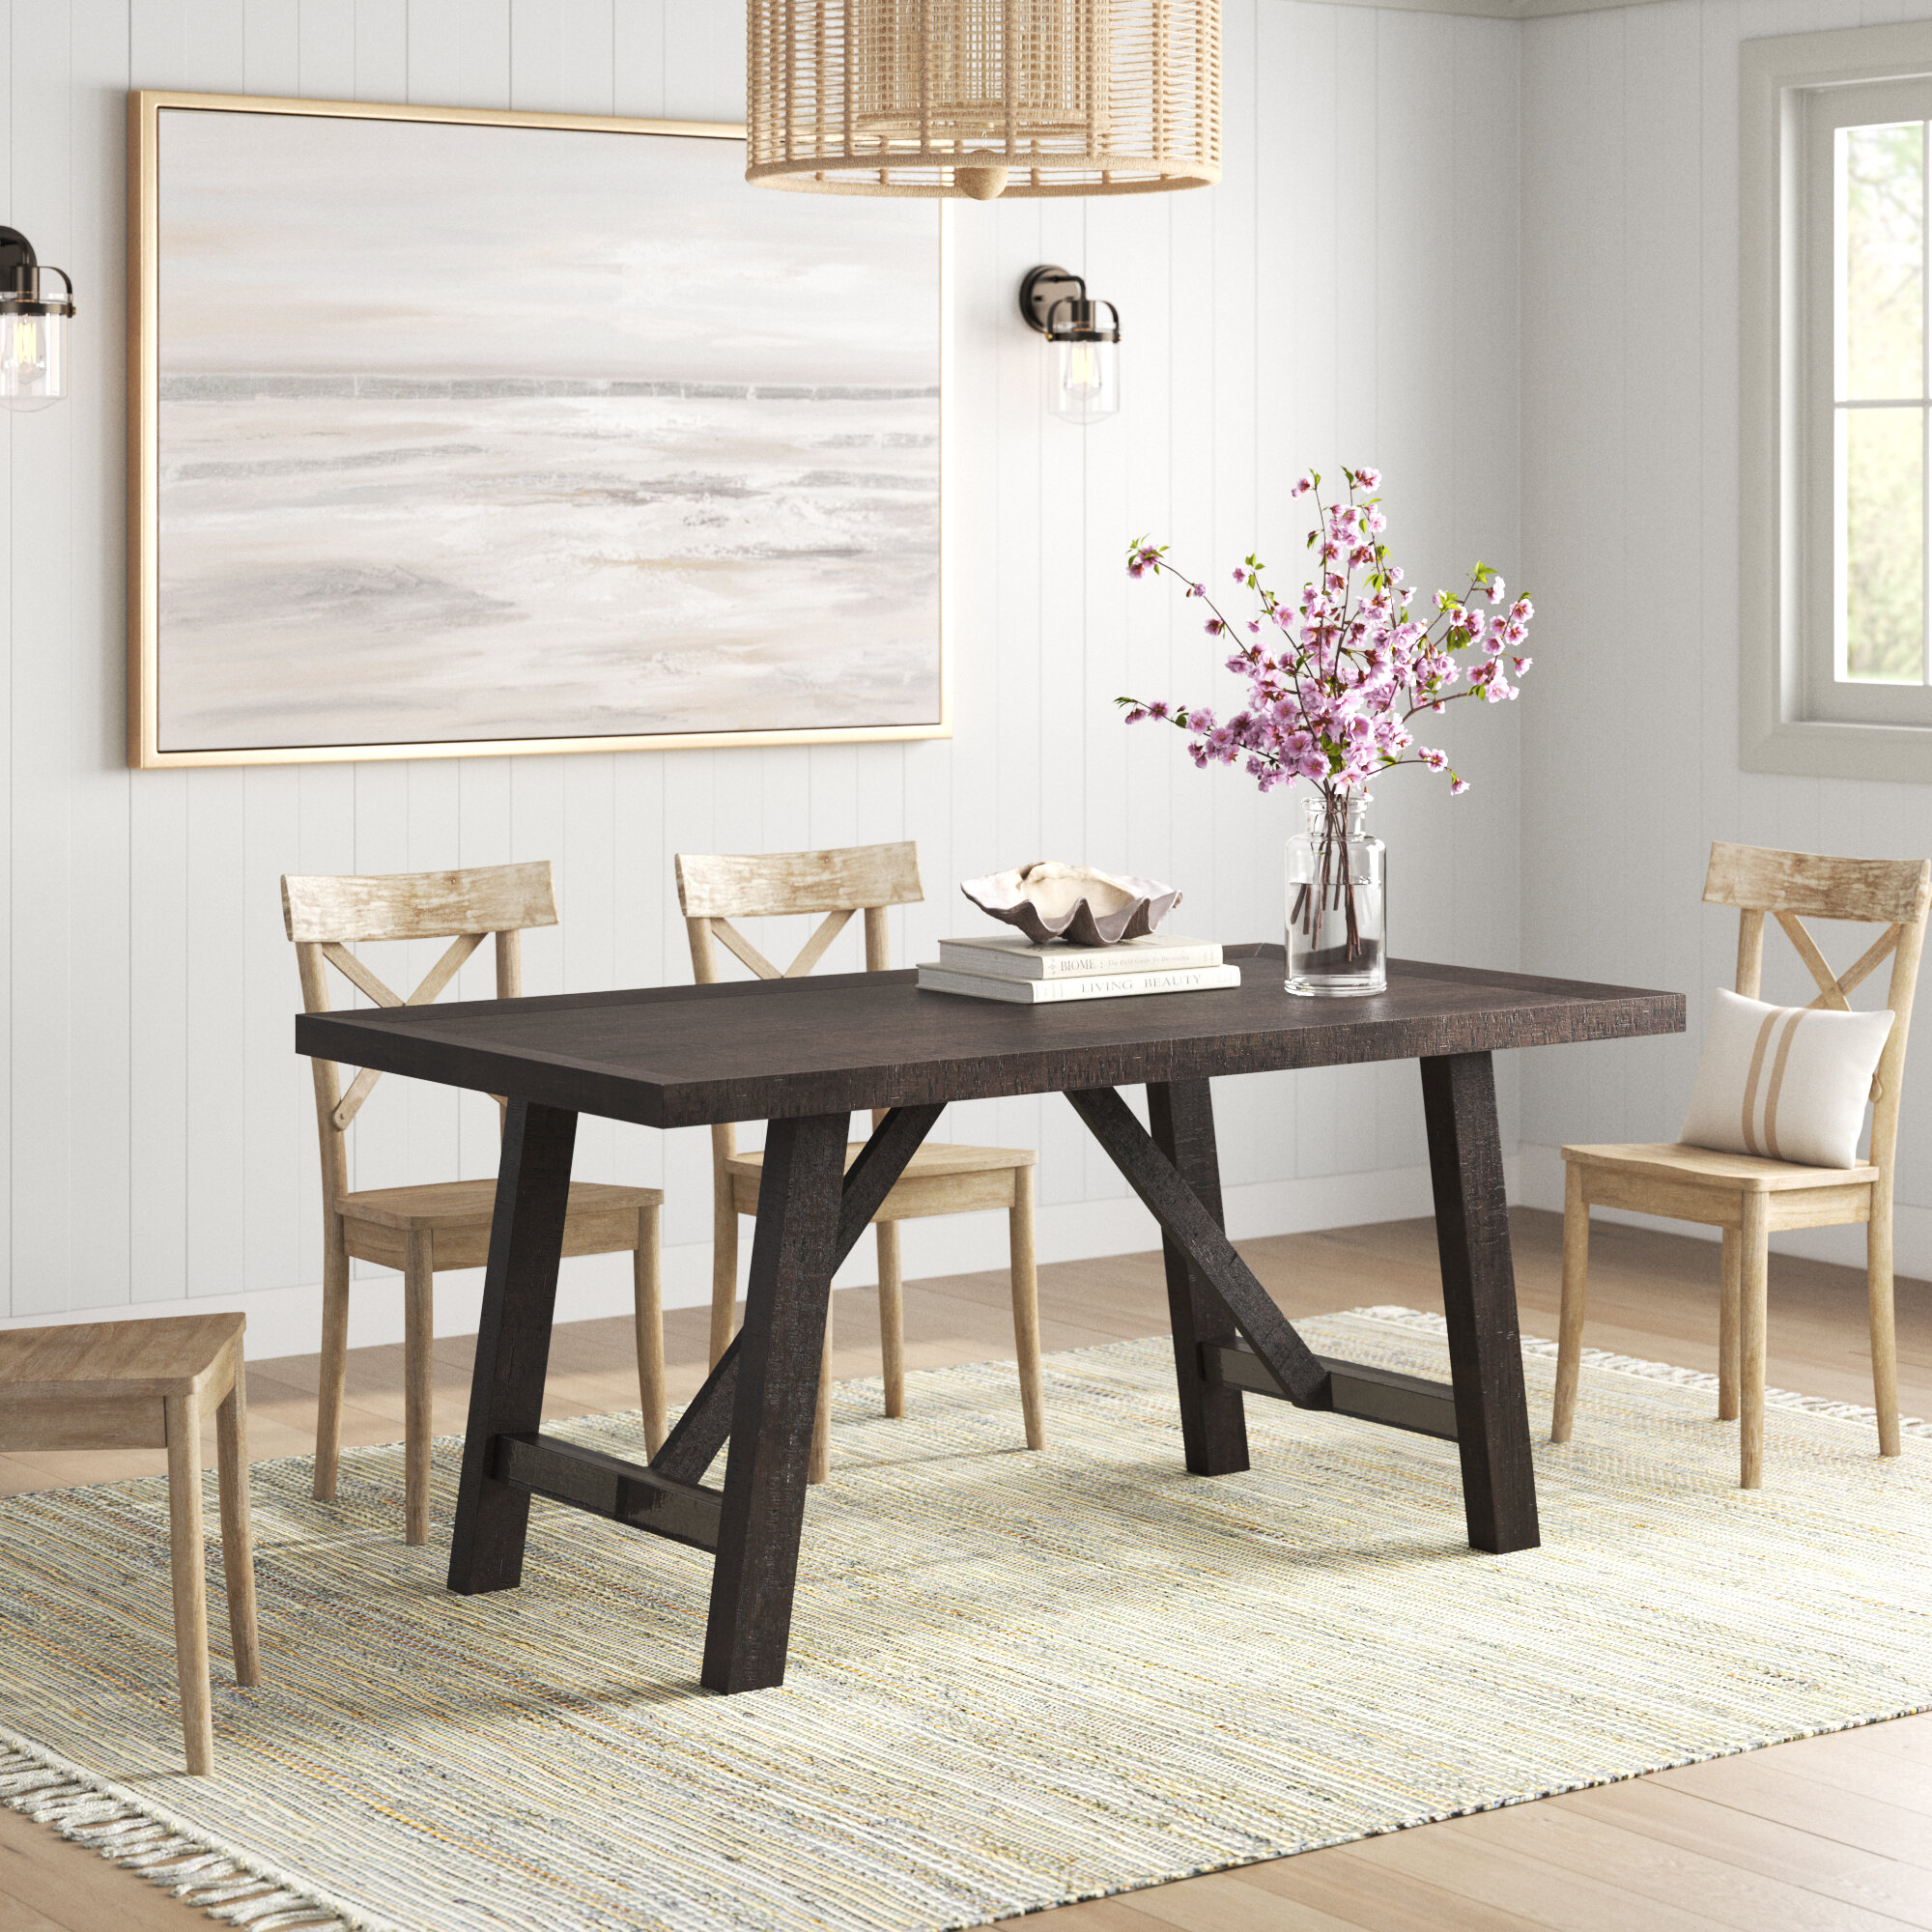 Hover ferry Creep Sand & Stable Ernie 66'' Acacia Solid Wood Trestle Dining Table & Reviews |  Wayfair